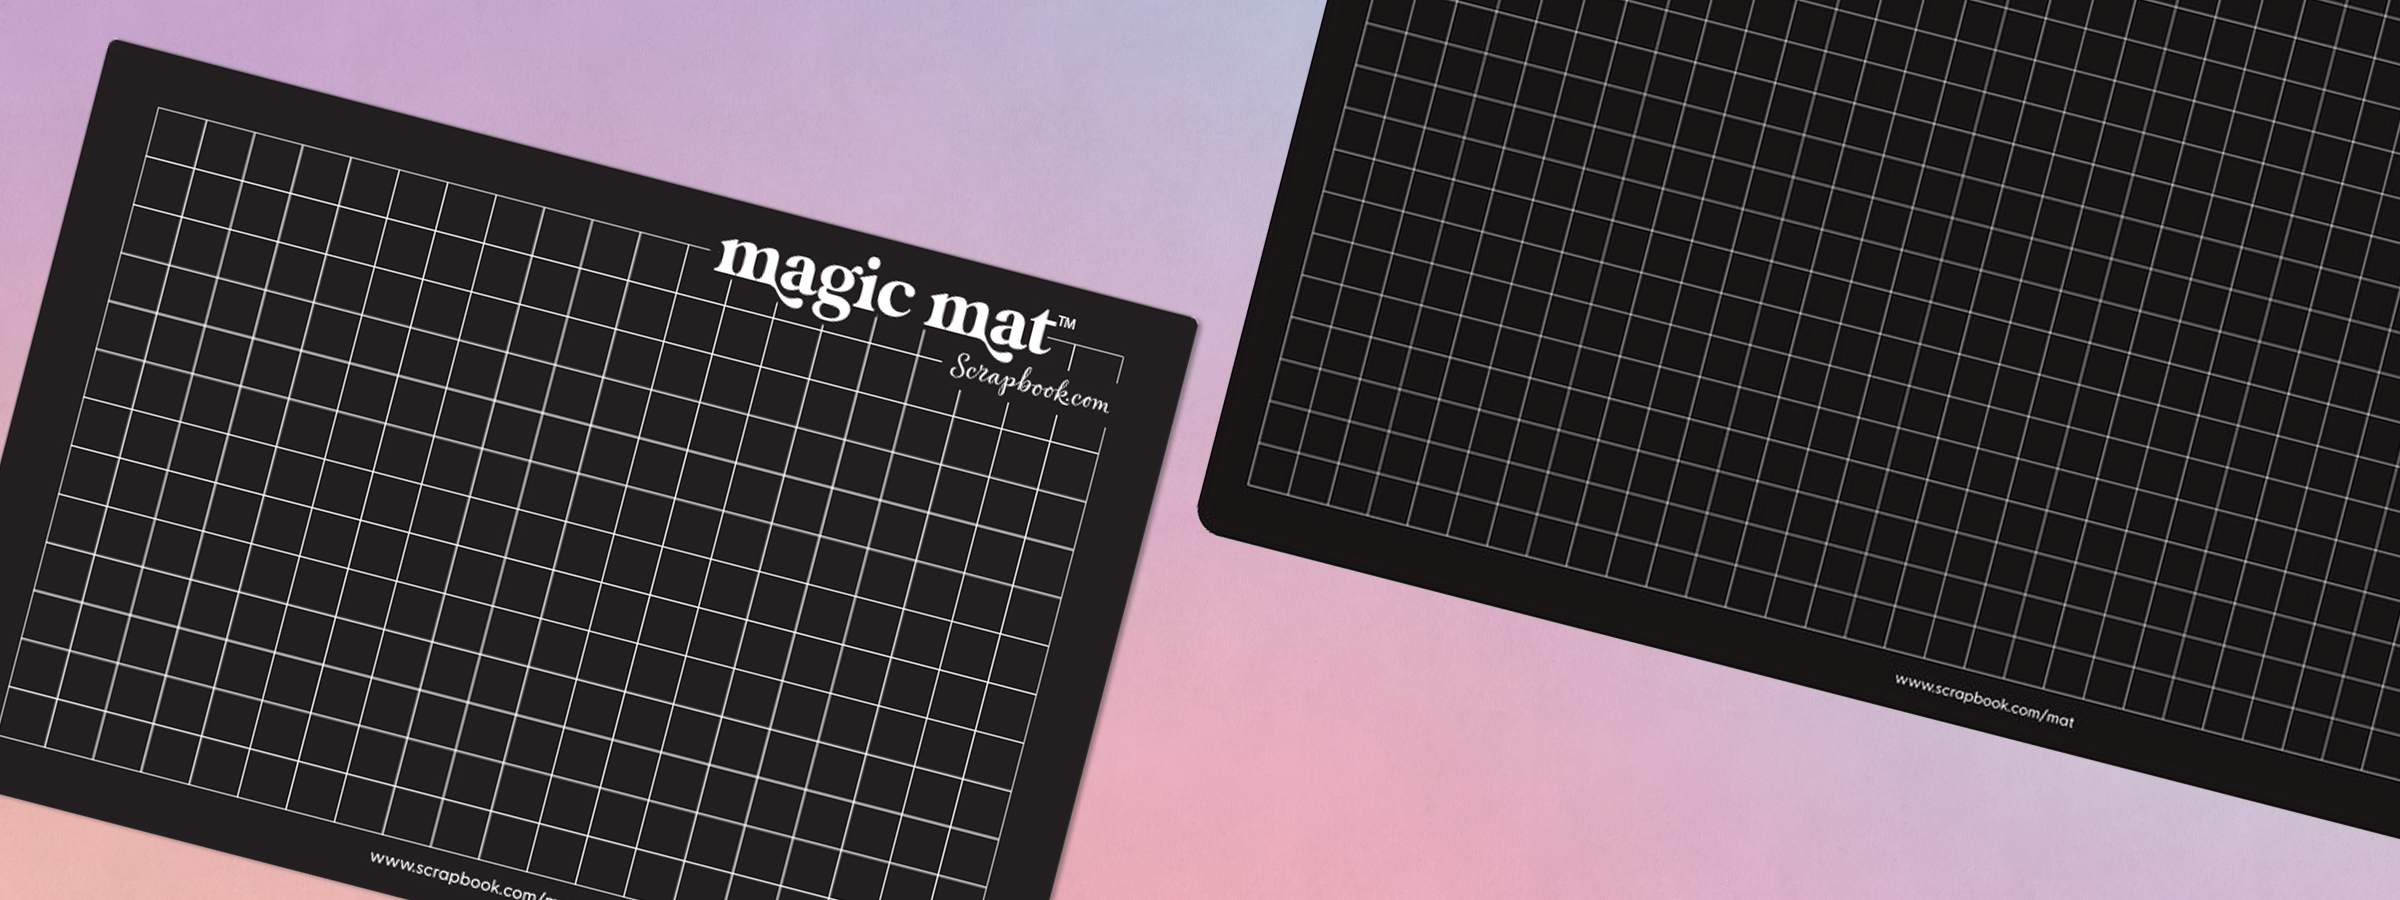 NEW Magic Mat is a Die Cutting Game Changer - This event was pre-recorded 